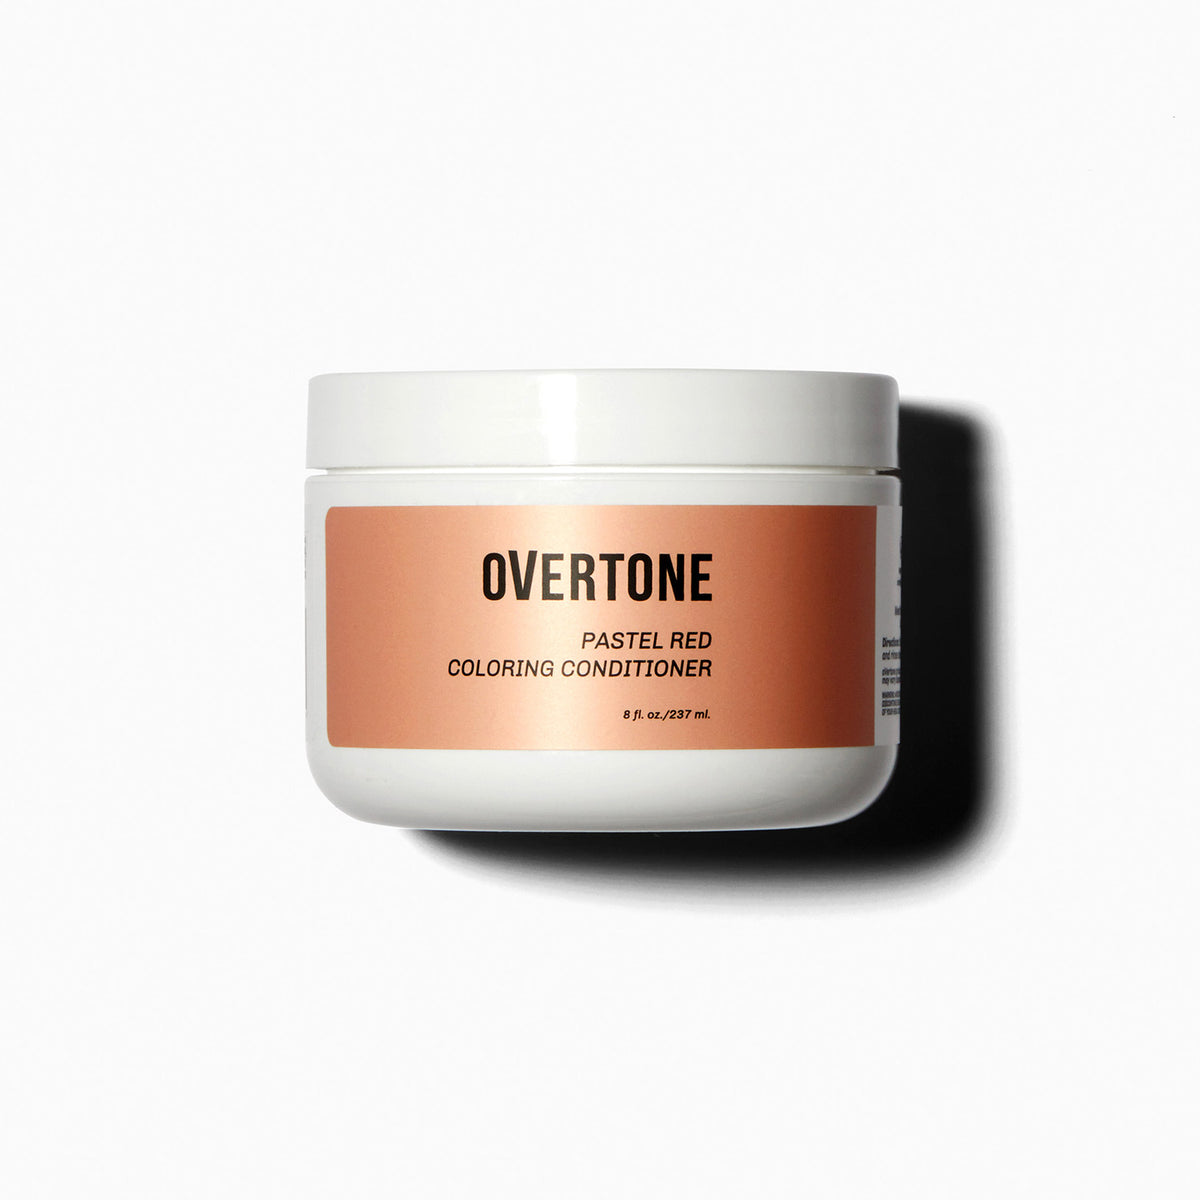 oVertone Pastel Red Coloring Conditioner